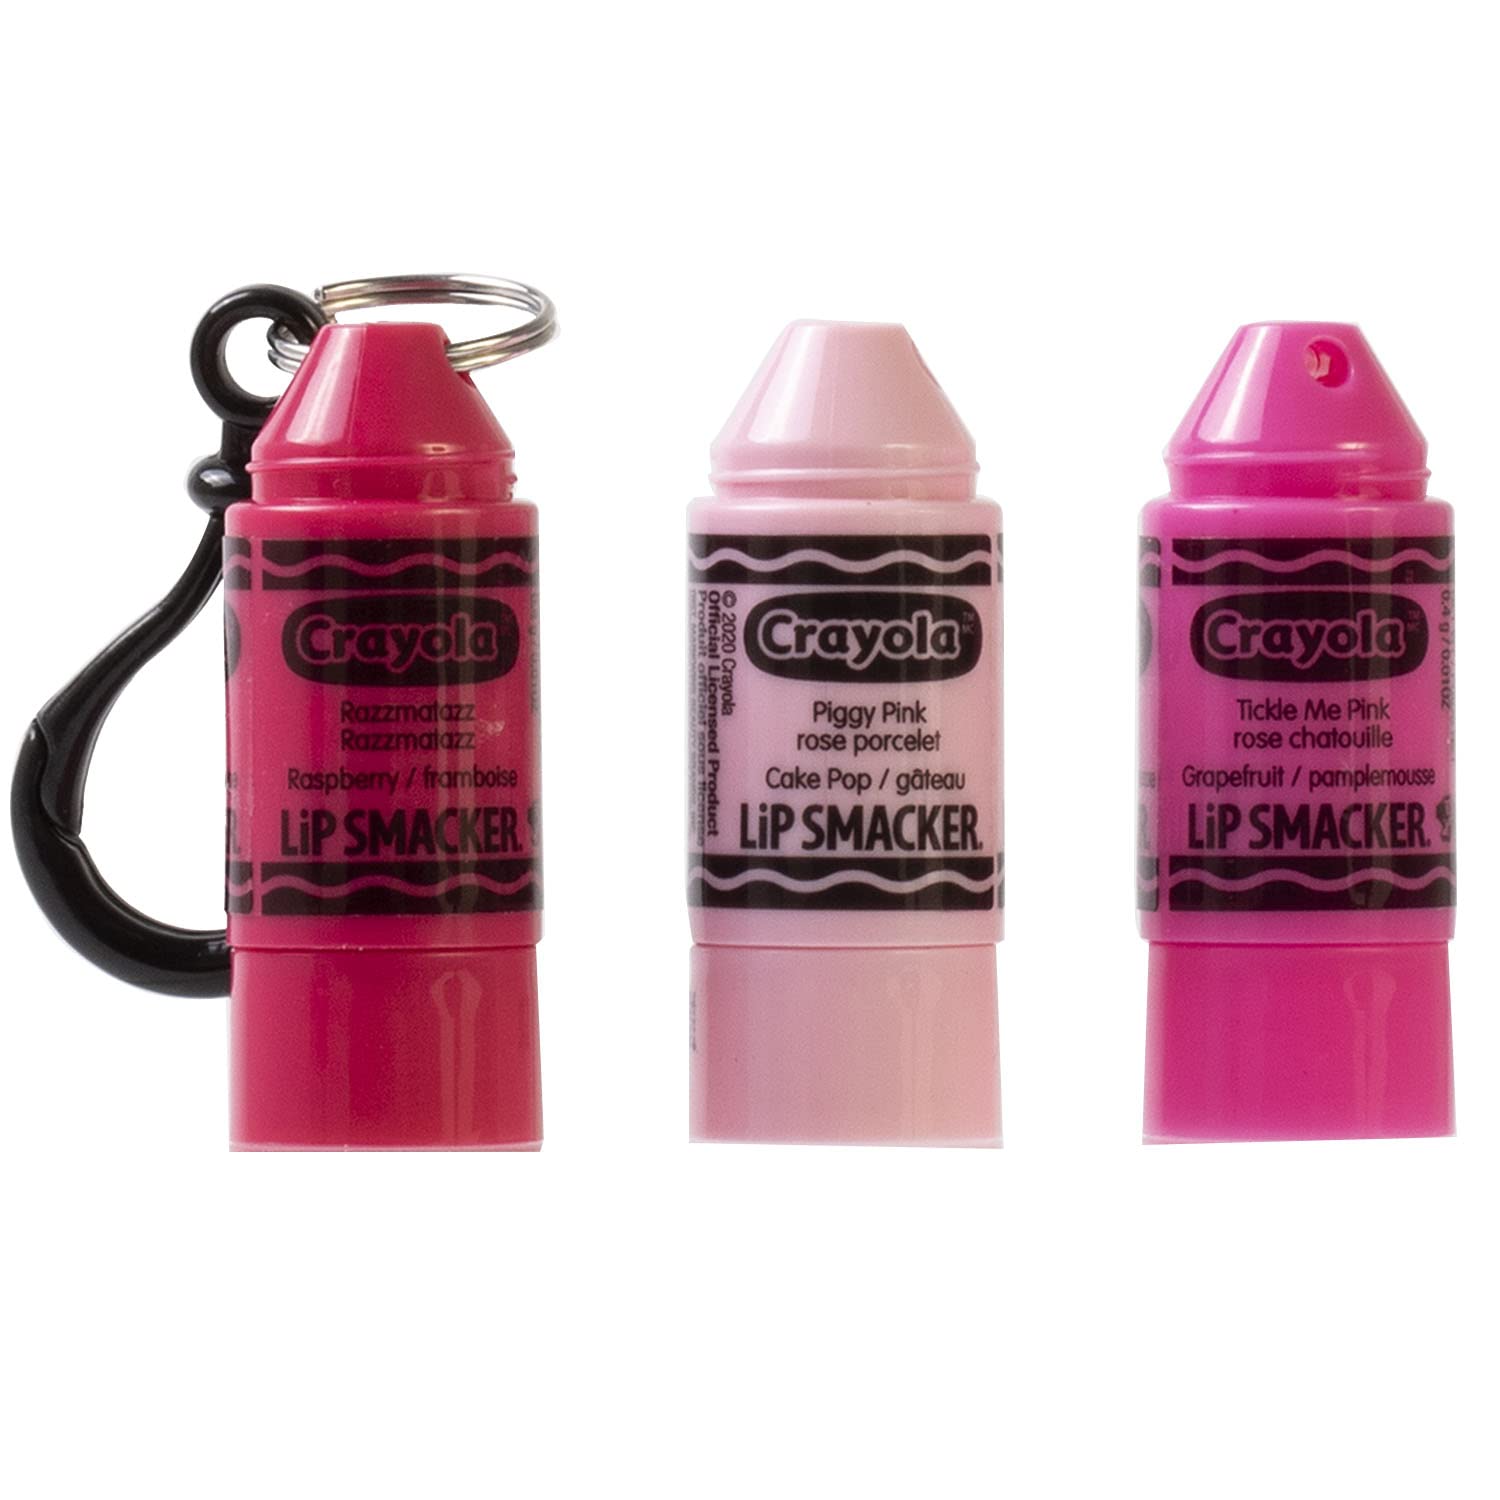 Lip Smacker Crayola Crayon Stackable Flavored Clear Balm Pink, Pinks, 0.03 Ounce